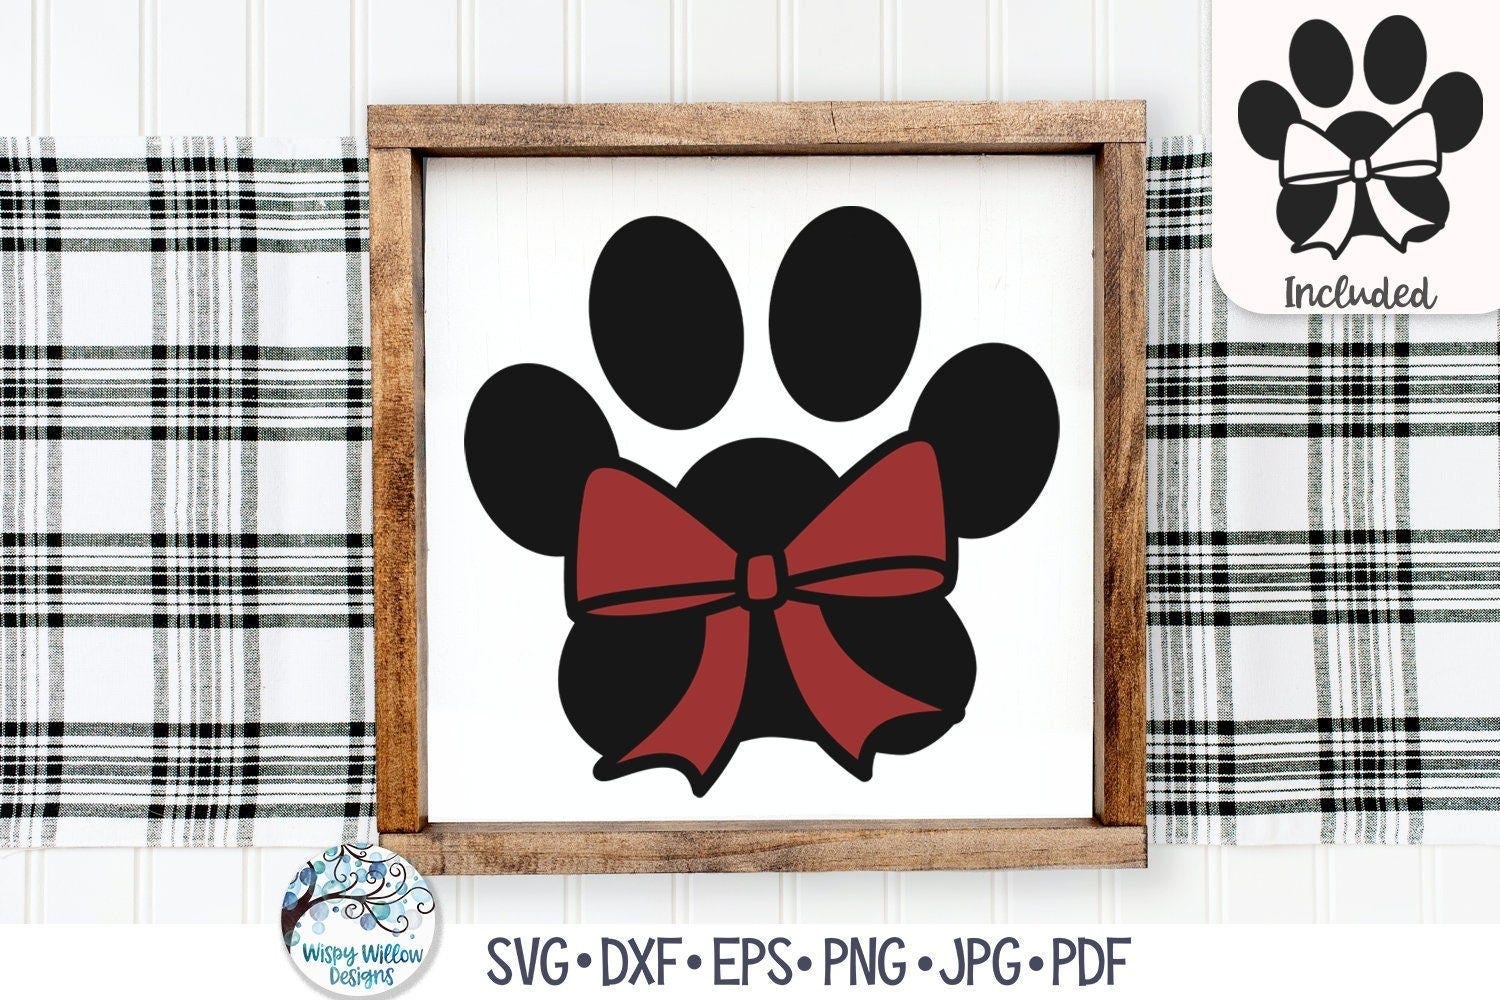 Paw Print with Ribbon Bow SVG, Christmas Dog Paw Print Svg, Pet Christmas Svg, Dog Christmas, Animal Paw Png, Vinyl Decal File for Cricut